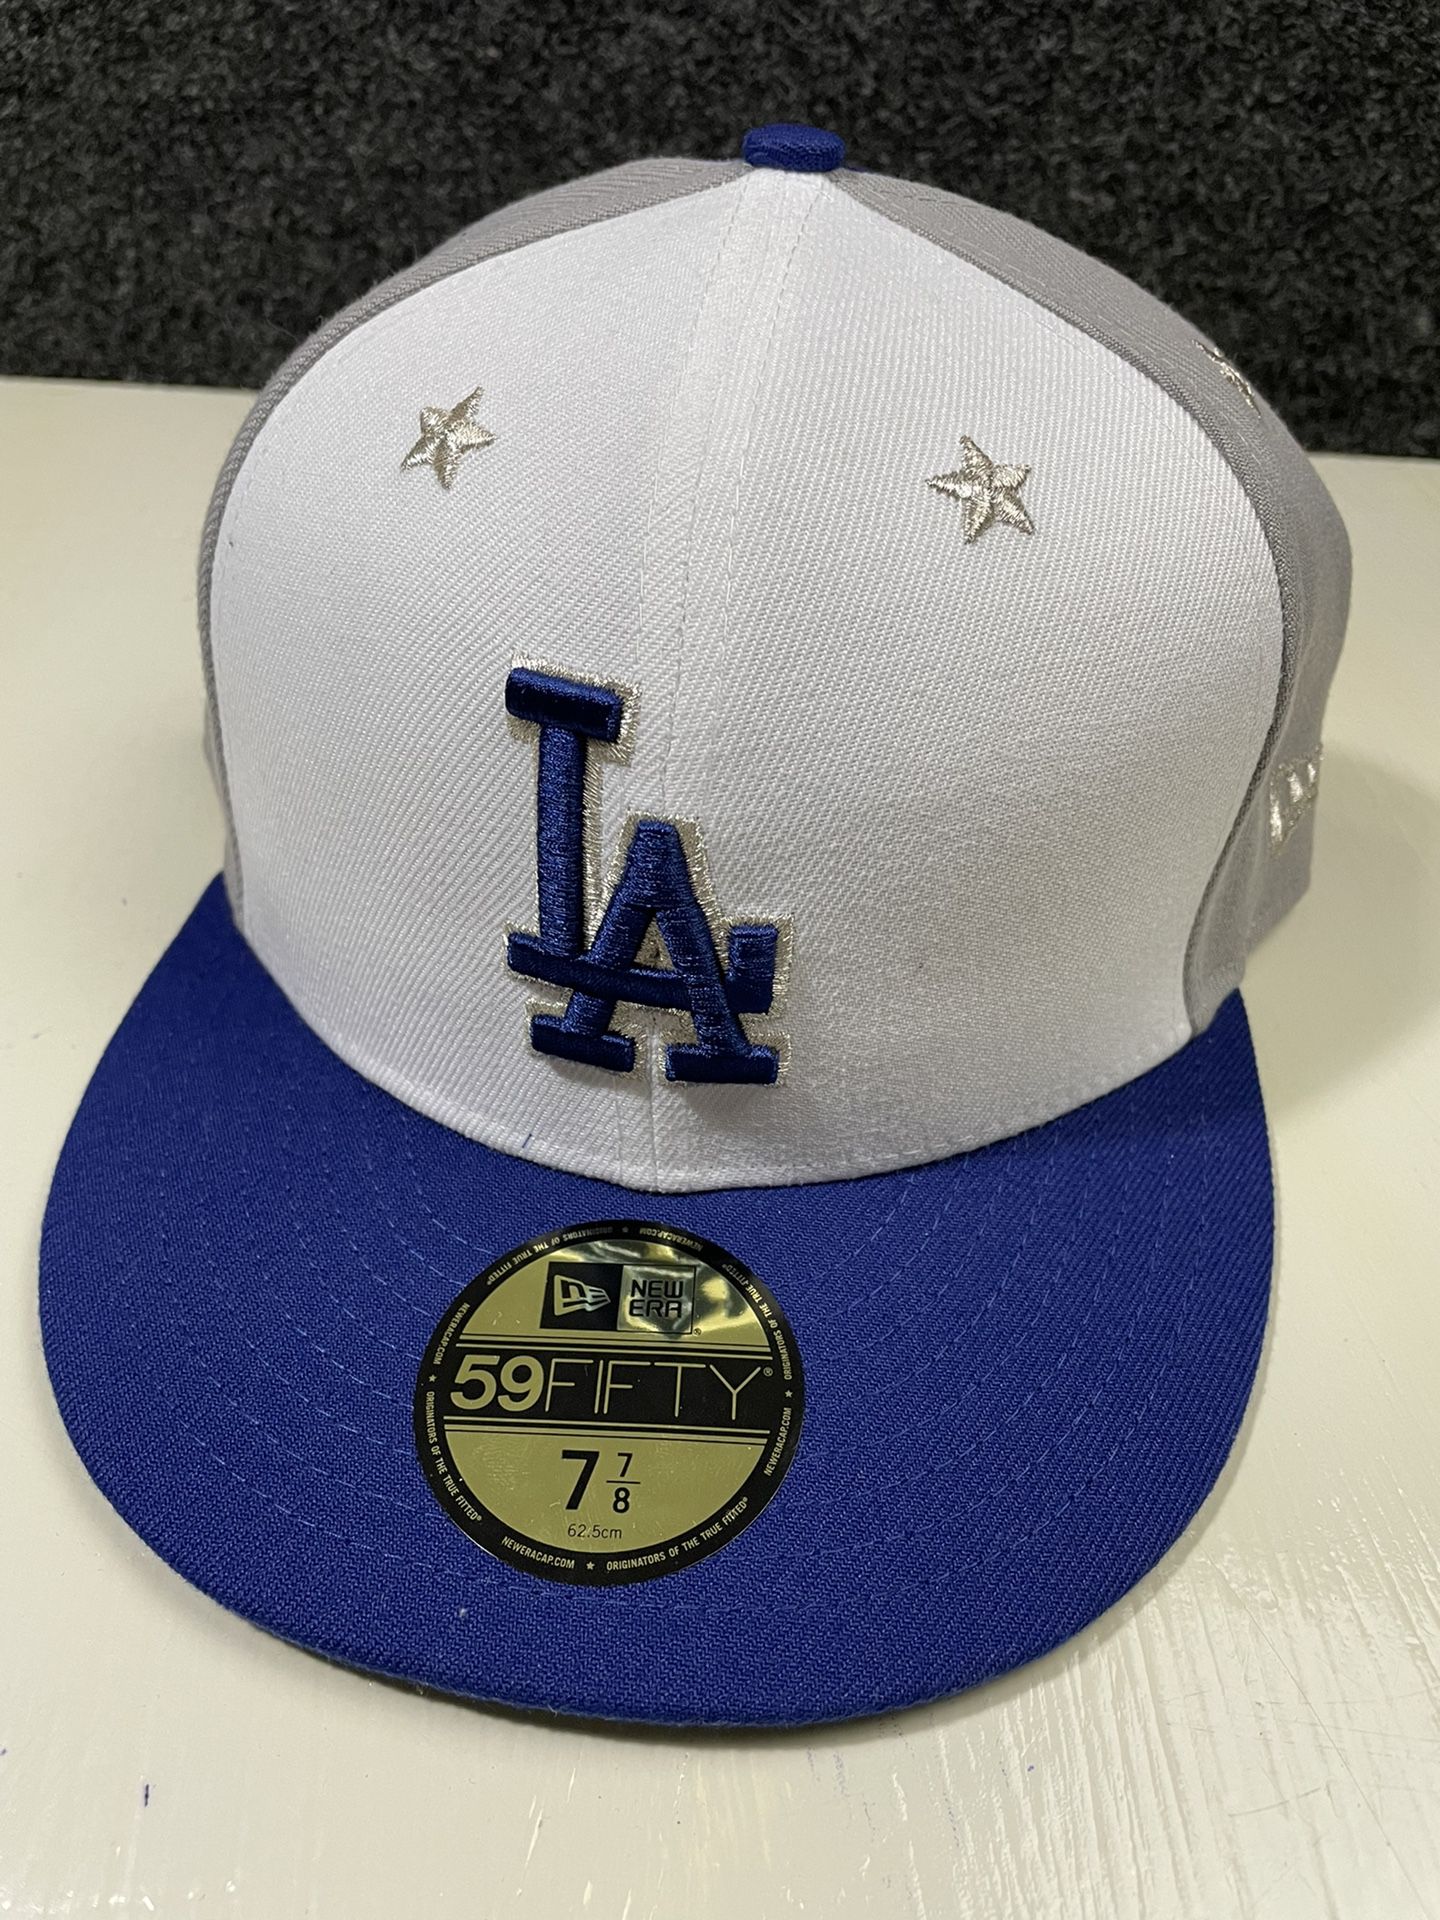 Light Blue Dodgers Fitted Hat 7 1/2 for Sale in Irwindale, CA - OfferUp